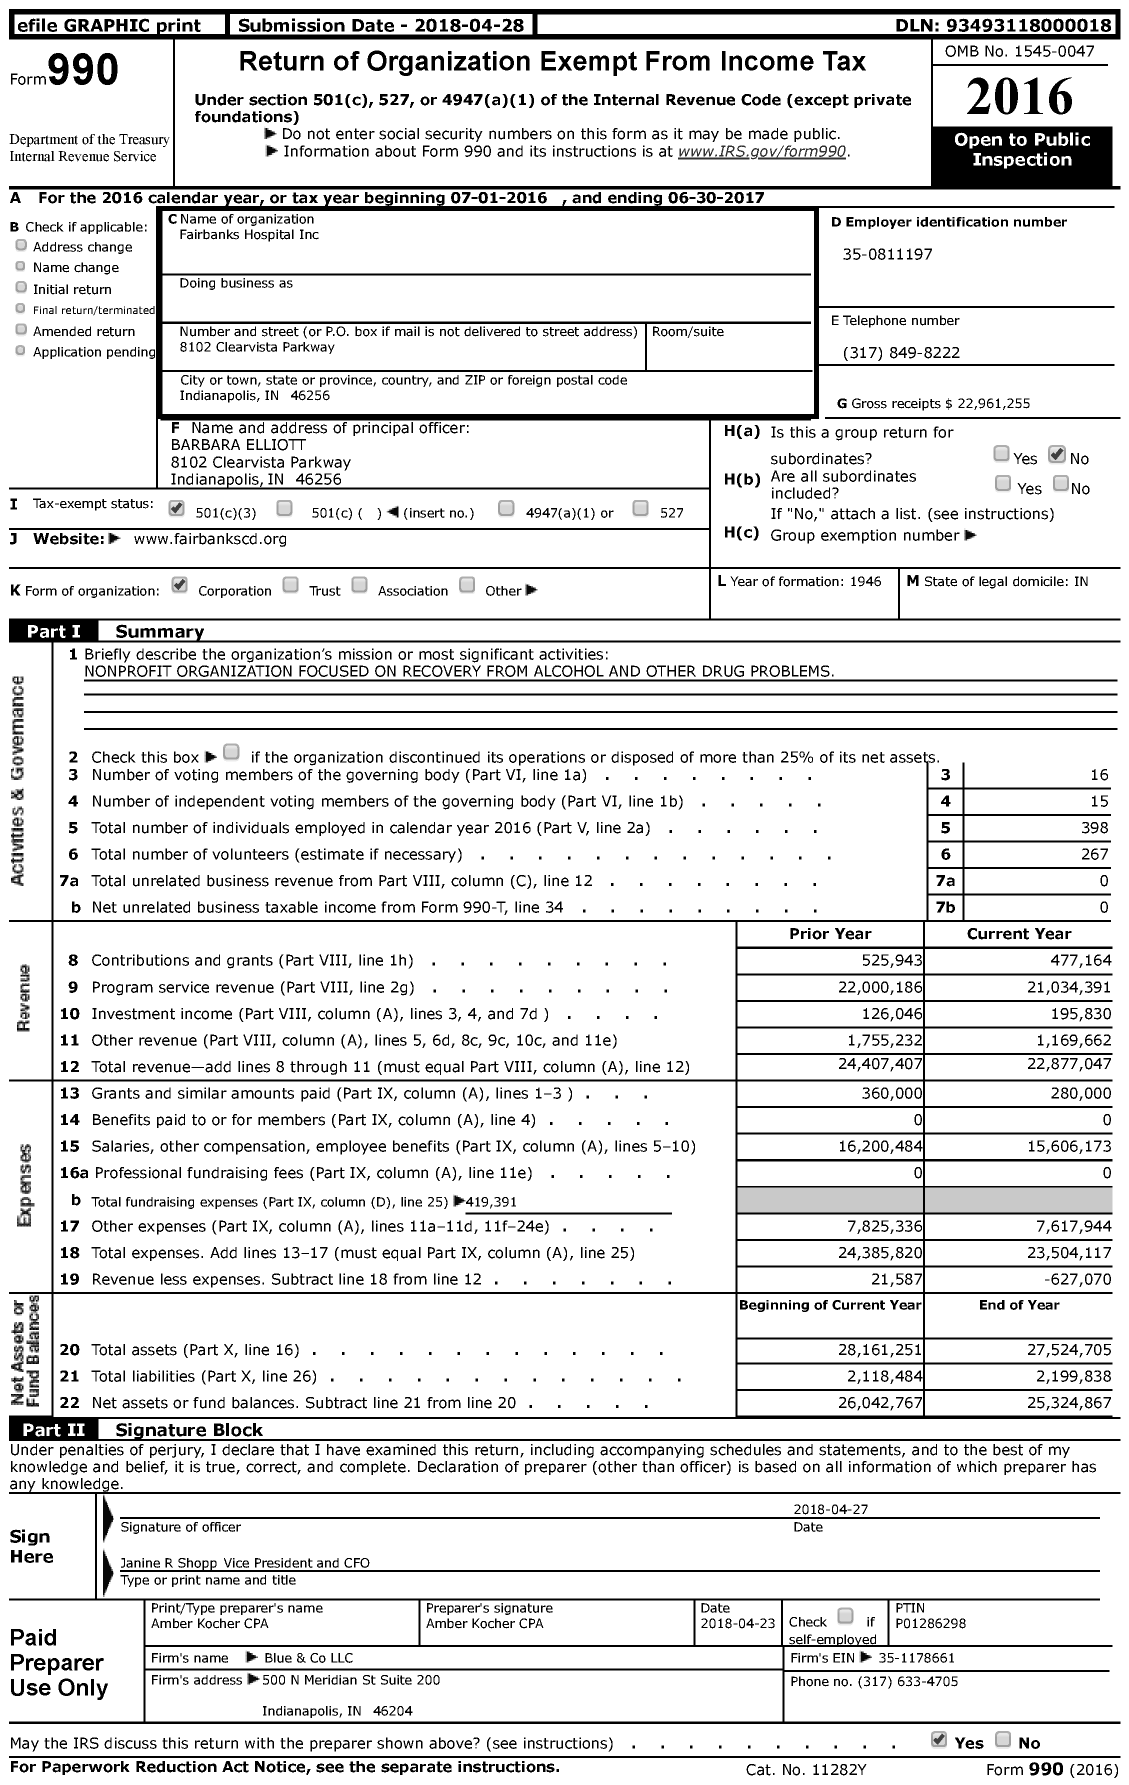 Image of first page of 2016 Form 990 for Community Fairbanks Recovery (CTR)